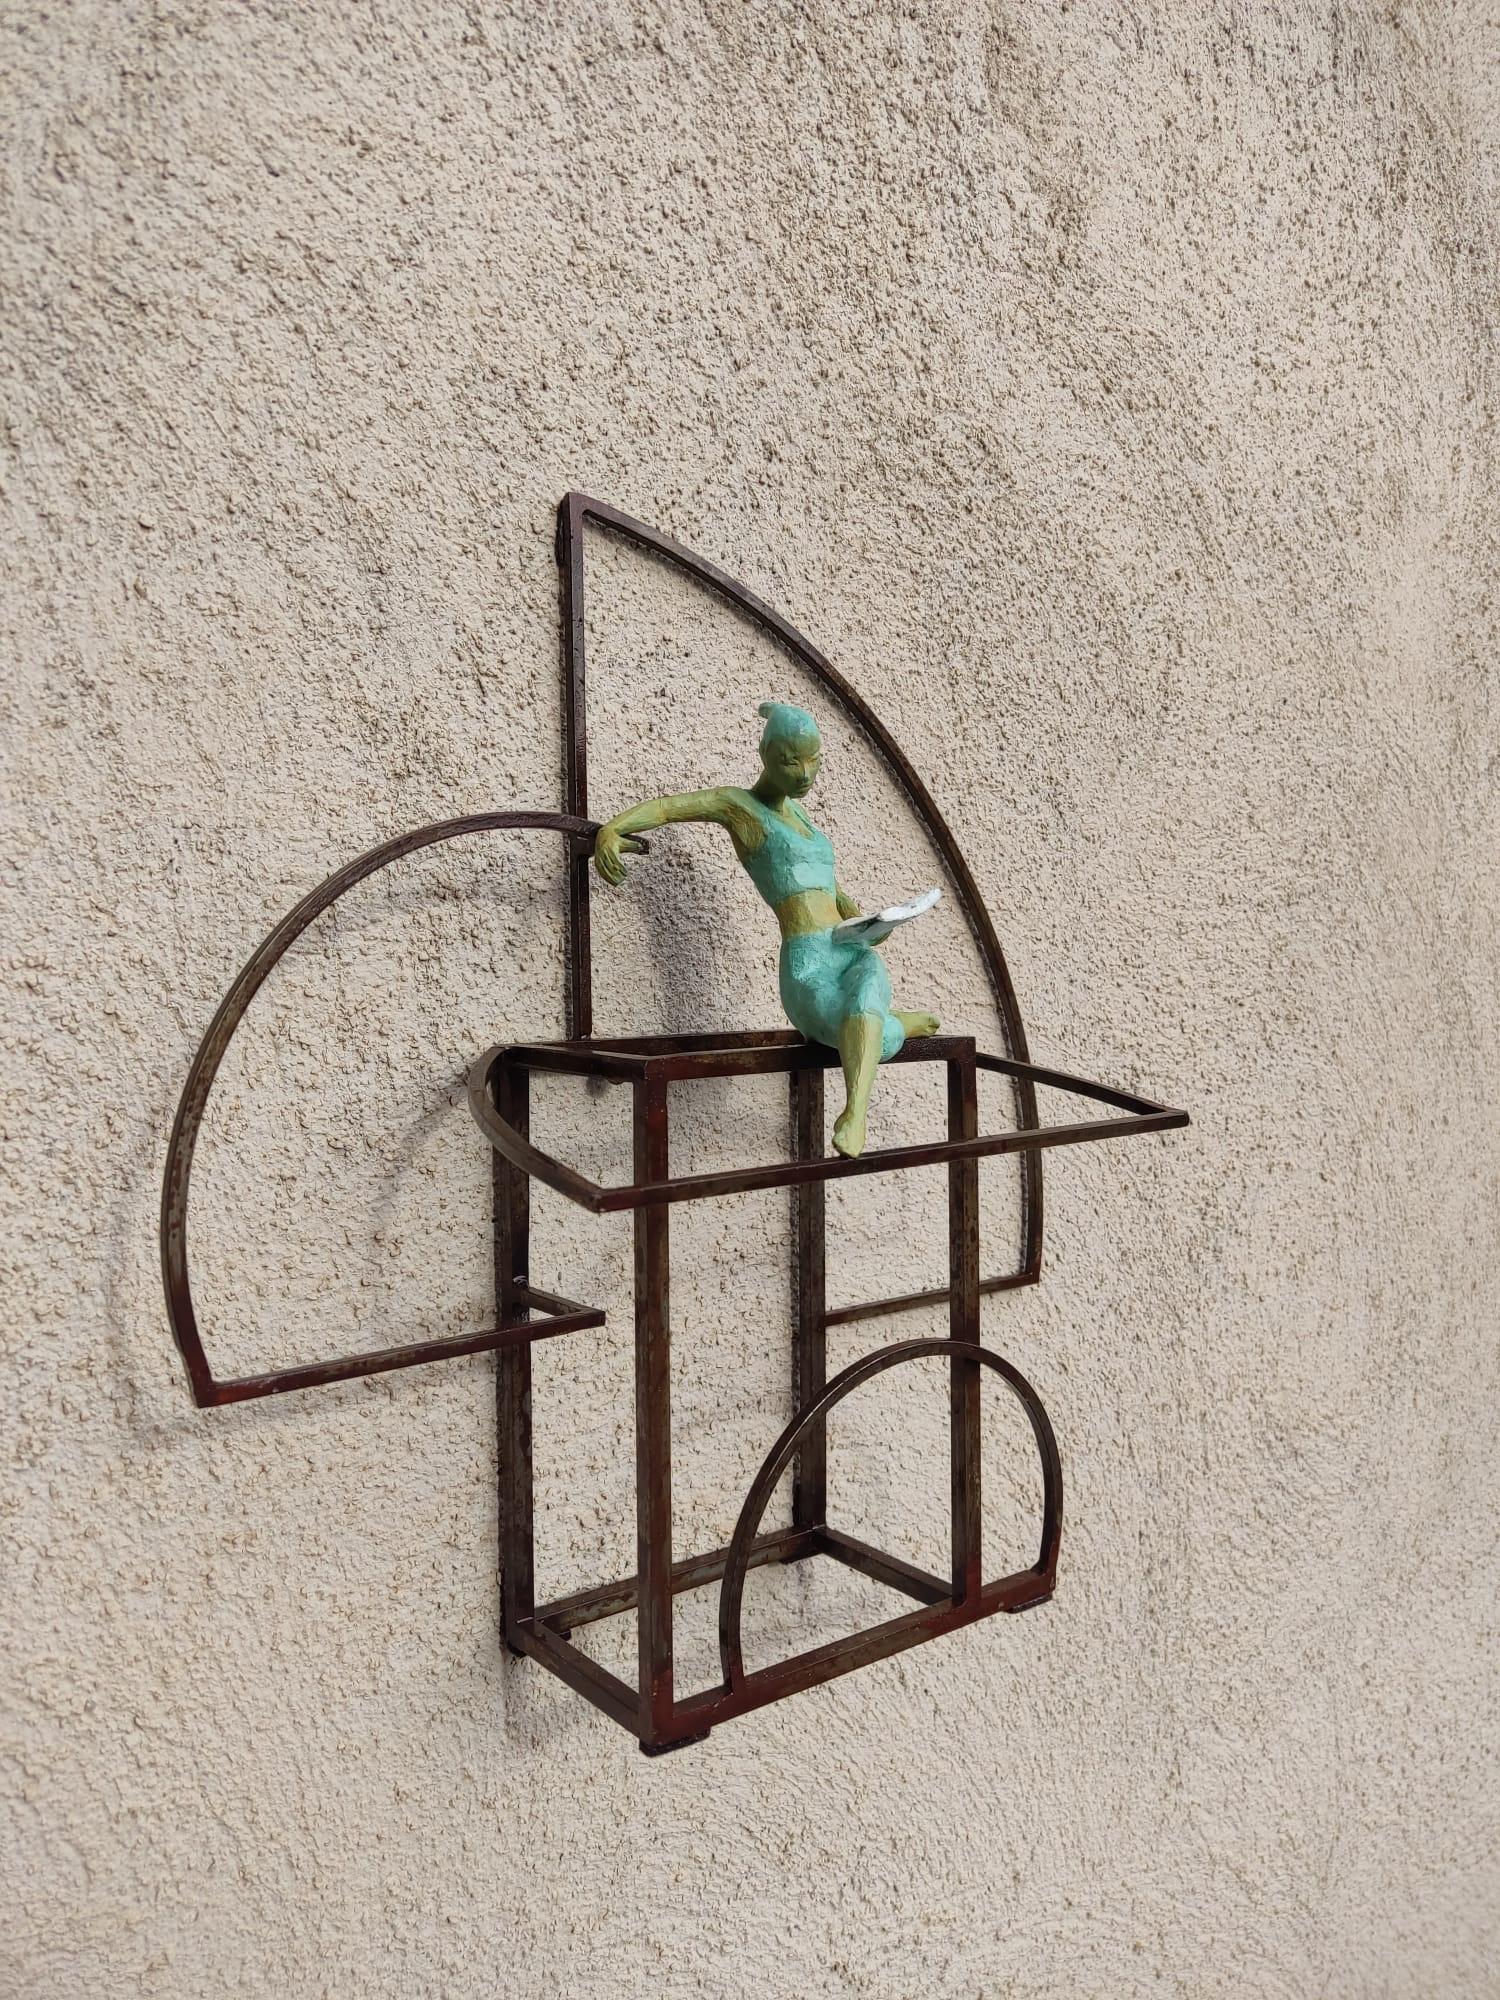 Mythology is a bronze sculpture with green patina, it is connected to a steel base. The edition size is 25. This sculpture stands on shelf as well as be hung on wall. 

Joan’s latest sculpture series of female figures brings an out-of-the-box